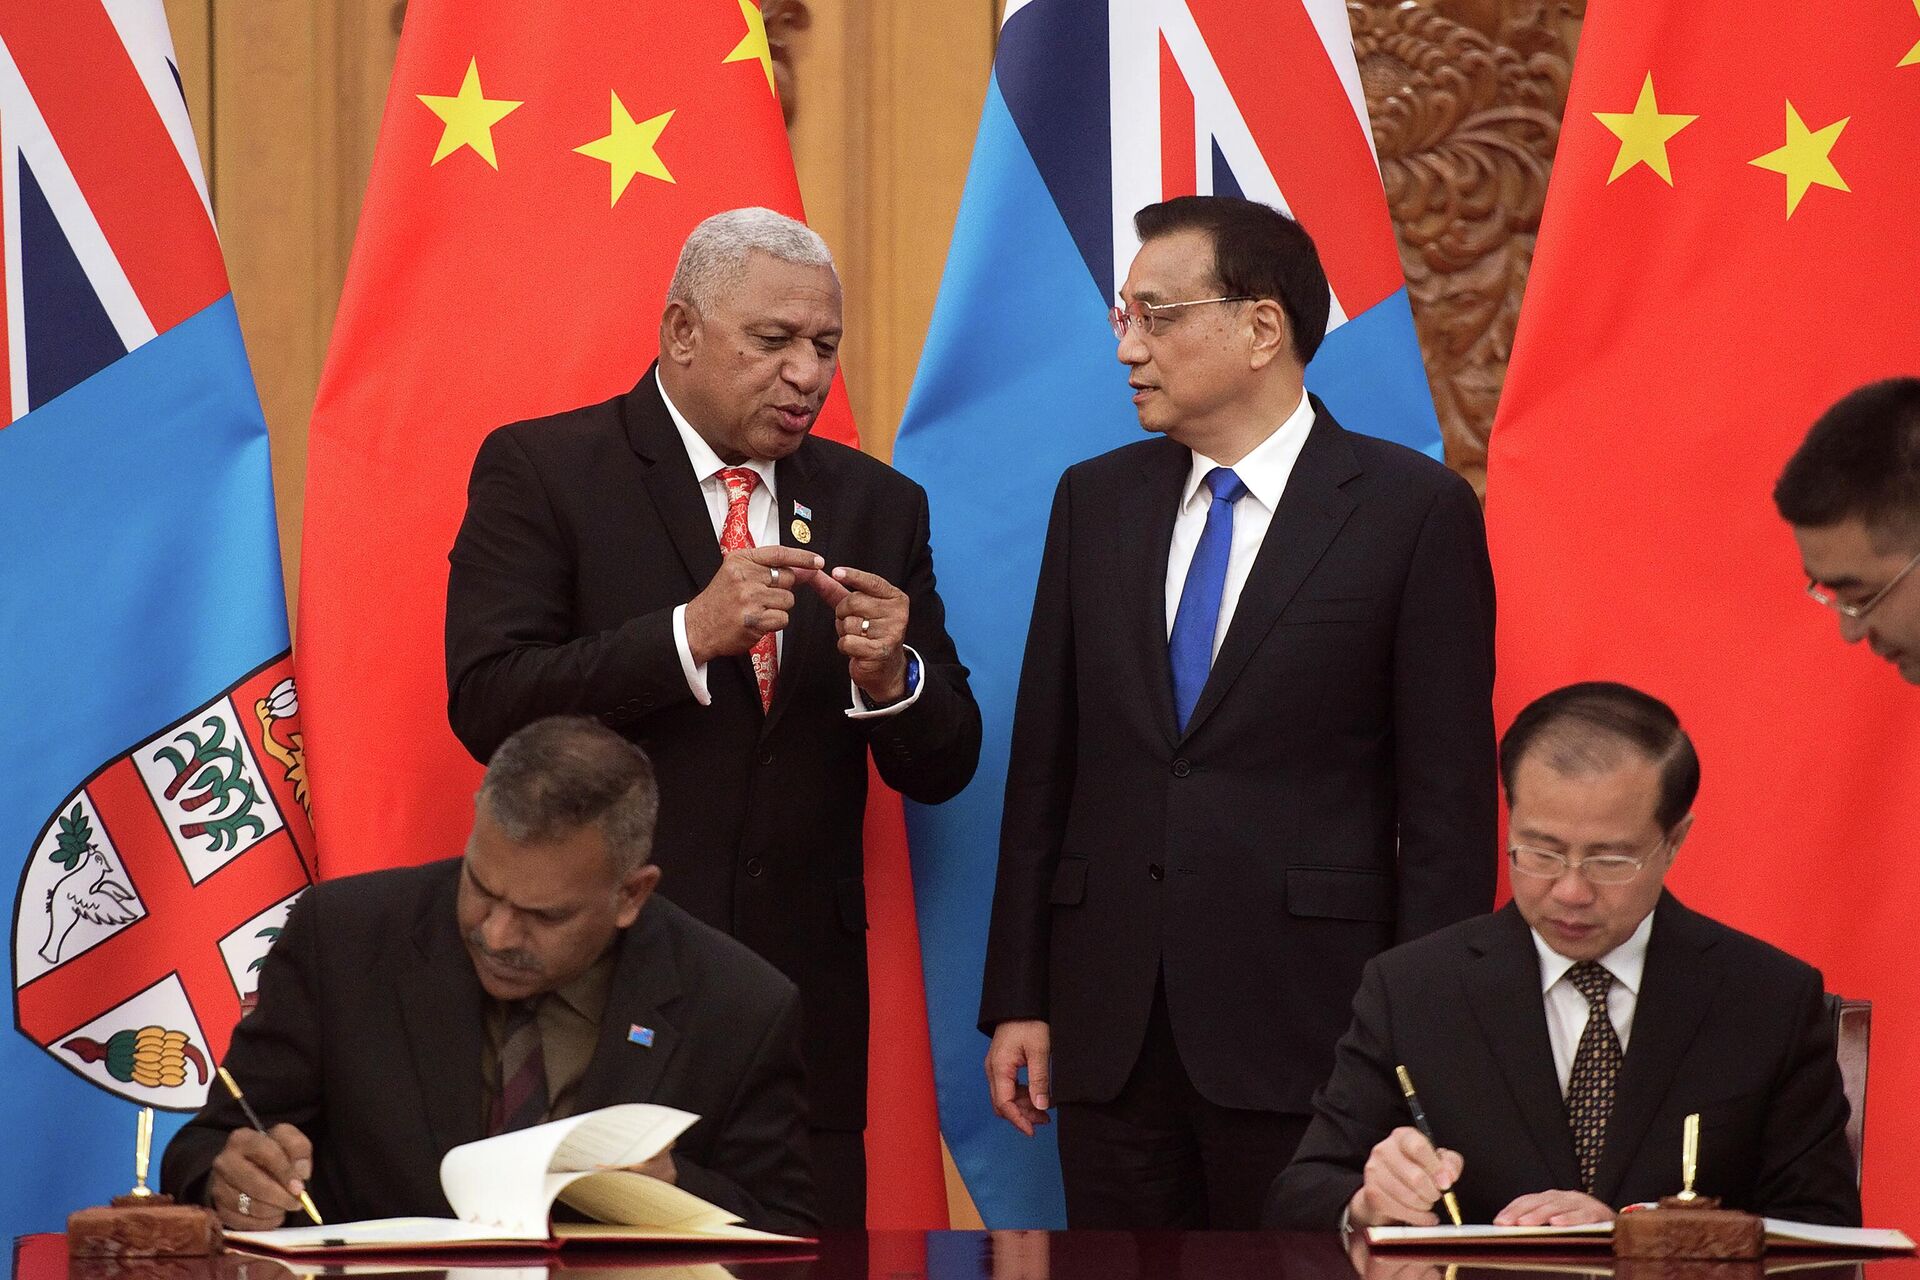 Fiji's Prime Minister Prime Minister Frank Bainimarama, top left, talks with Chinese Premier Li Keqiang, top right, during a signing ceremony between the two countries at the Great Hall of the People in Beijing Tuesday, May 16, 2017. China wants 10 small Pacific nations to endorse a sweeping agreement covering everything from security to fisheries in what one leader warns is a “game-changing” bid by Beijing to wrest control of the region. (Nicolas Asfouri/Pool Photo via AP, File) - Sputnik International, 1920, 06.06.2022